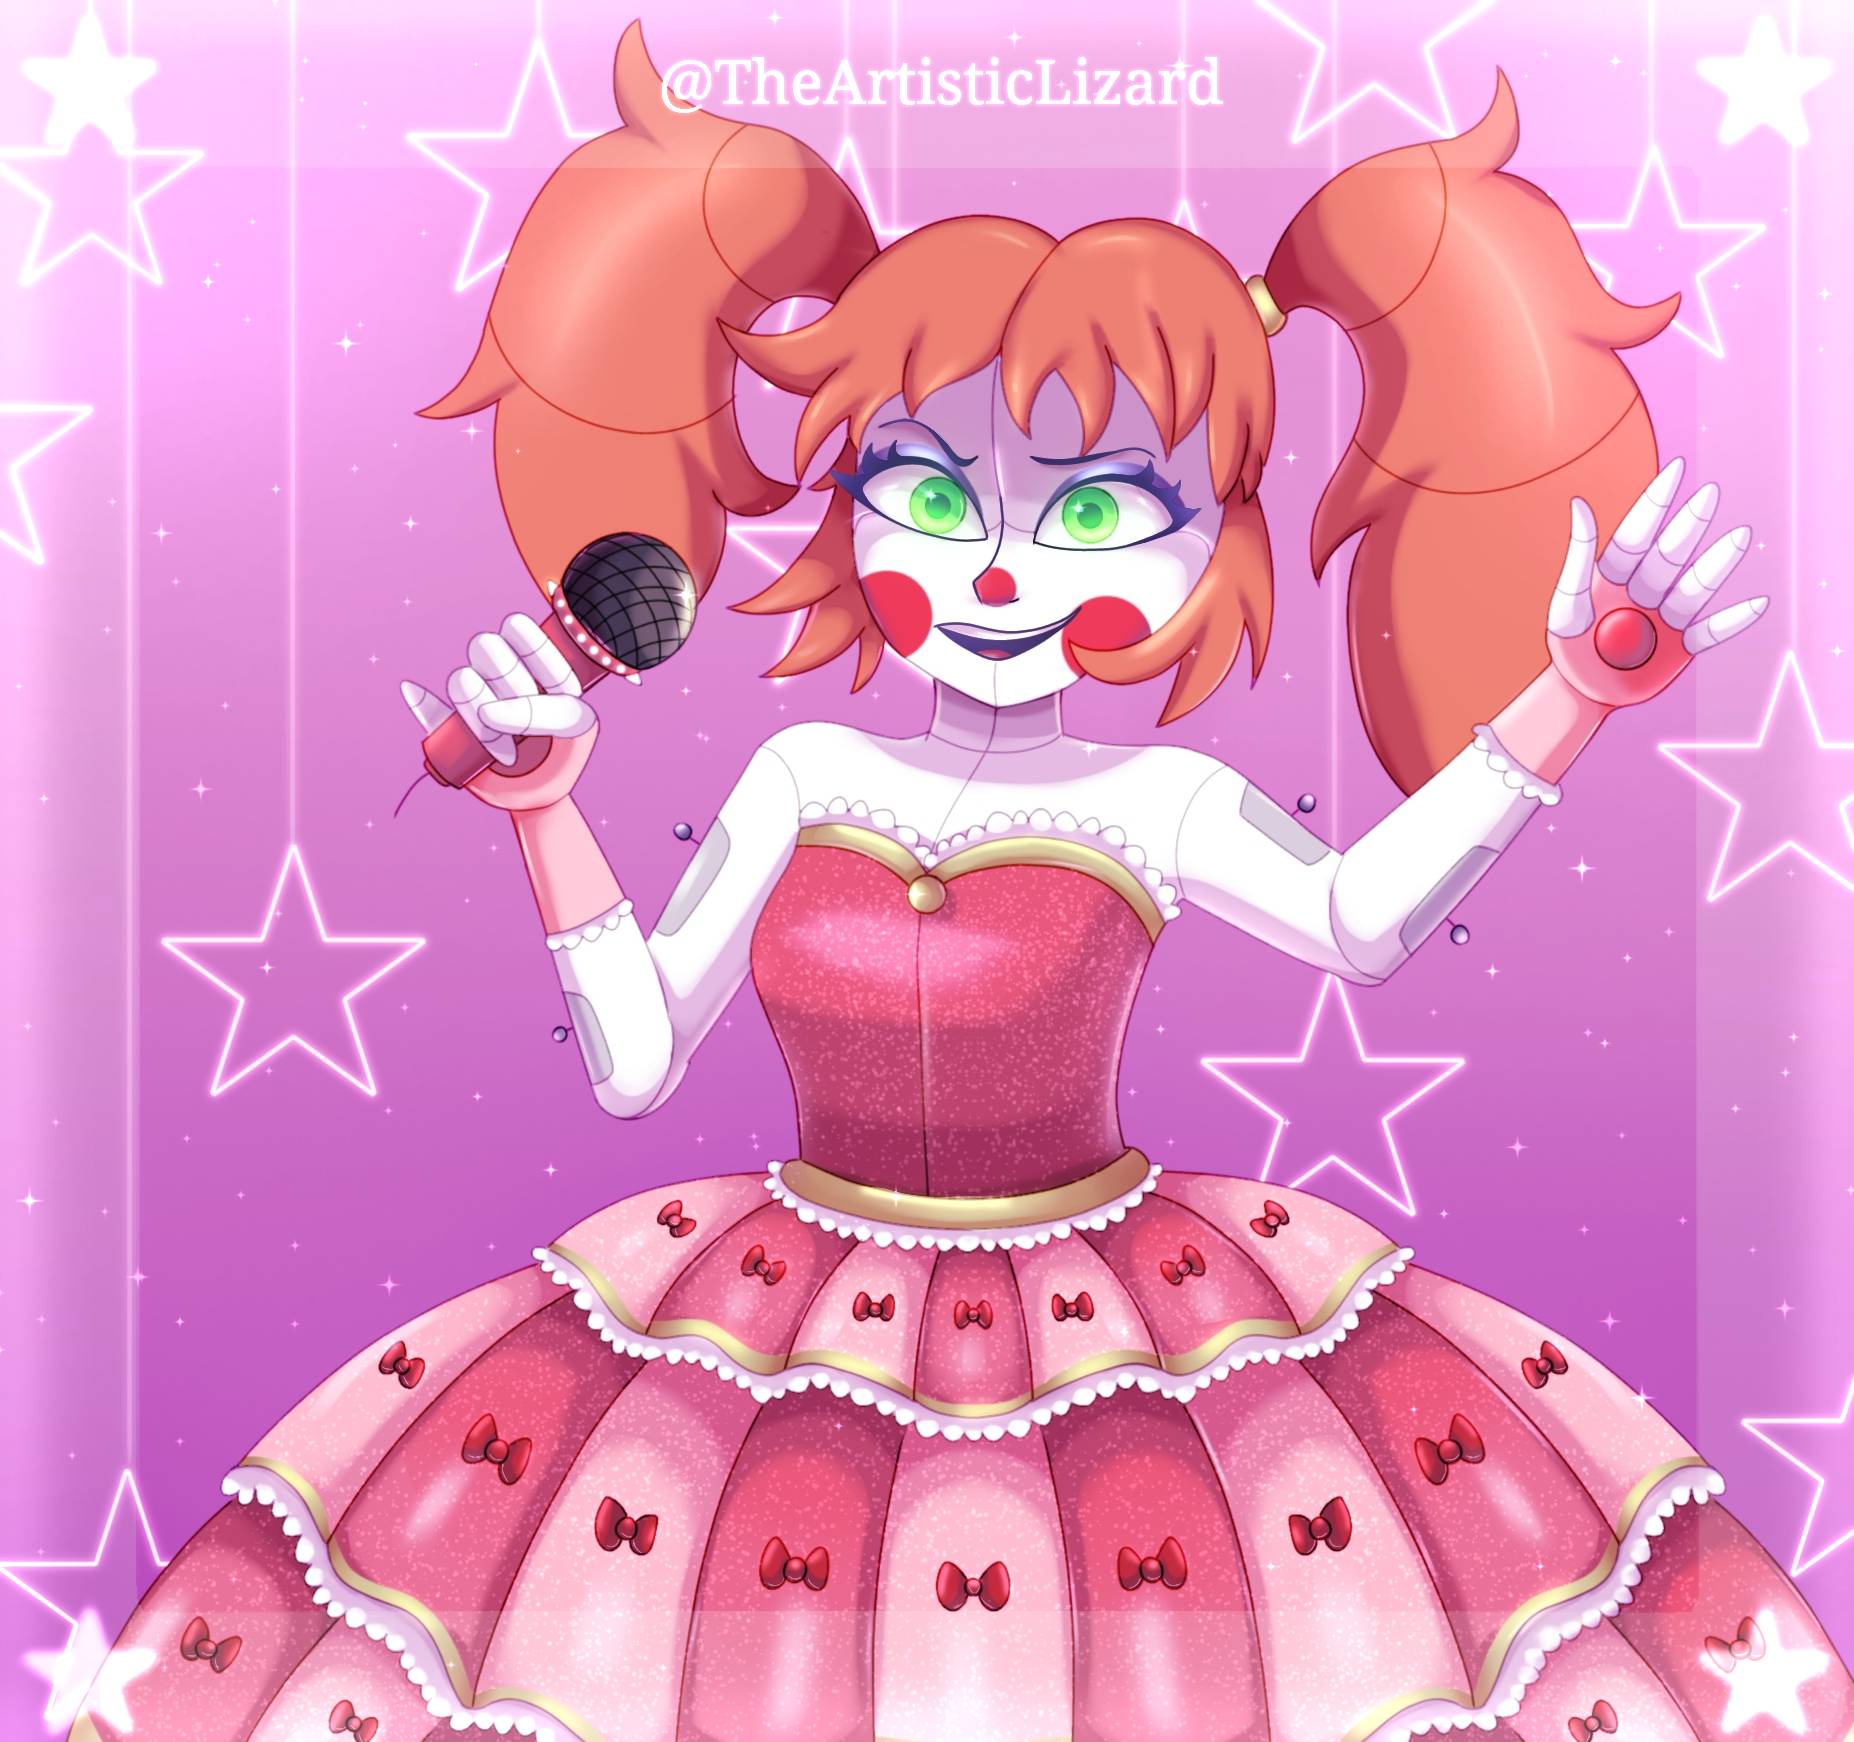 Circus Baby Fnaf sister location fanart by TheArtisticLizard on DeviantArt